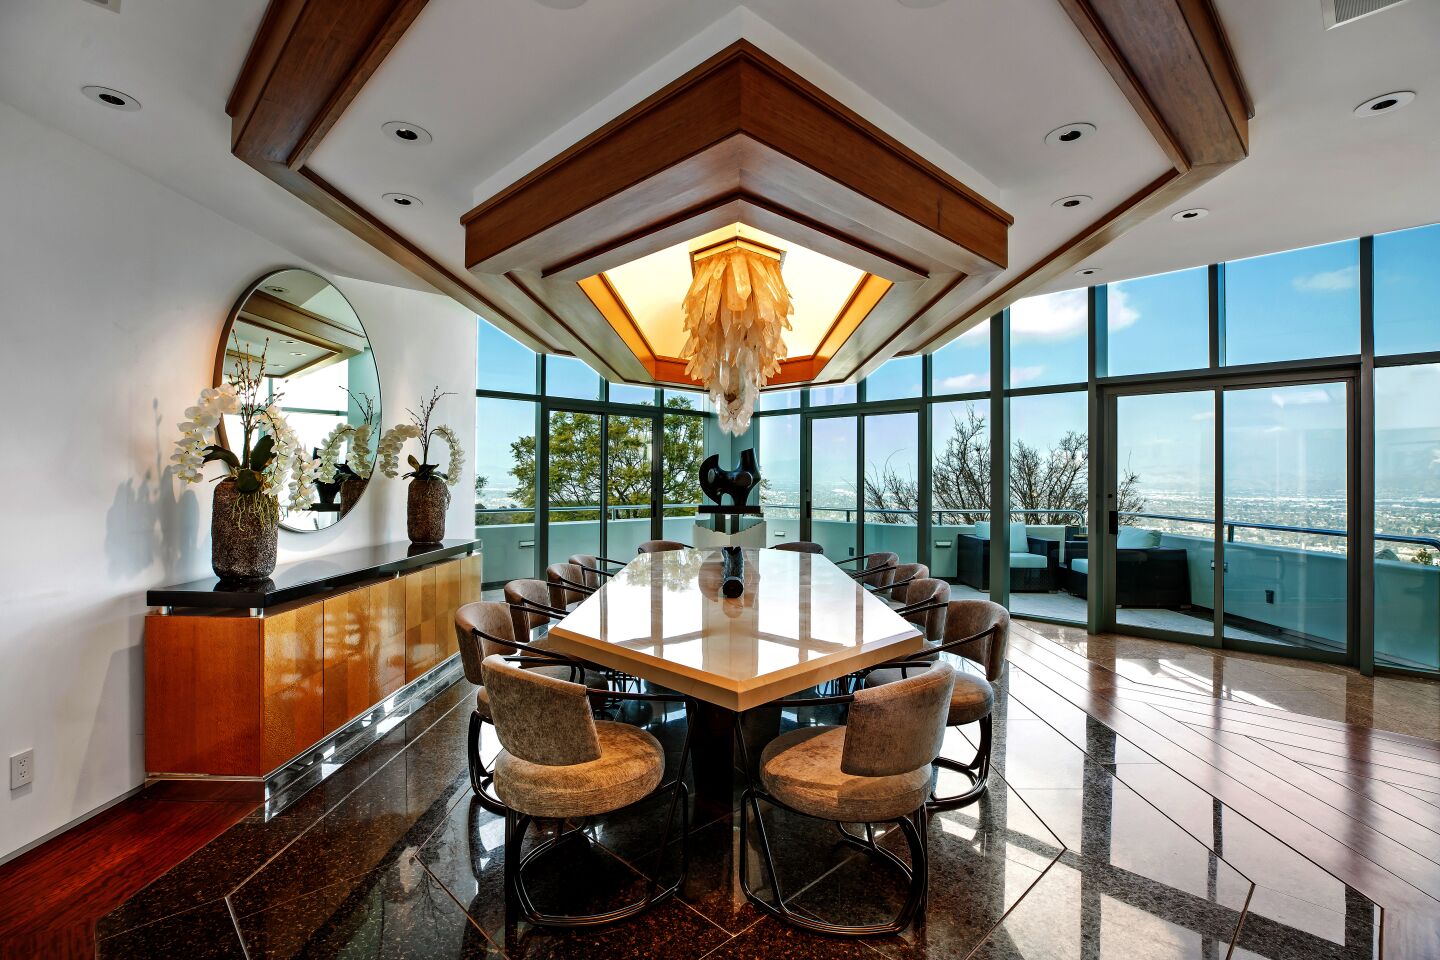 Pharrell's glass mansion has a dining room with a crystal rock chandelier.